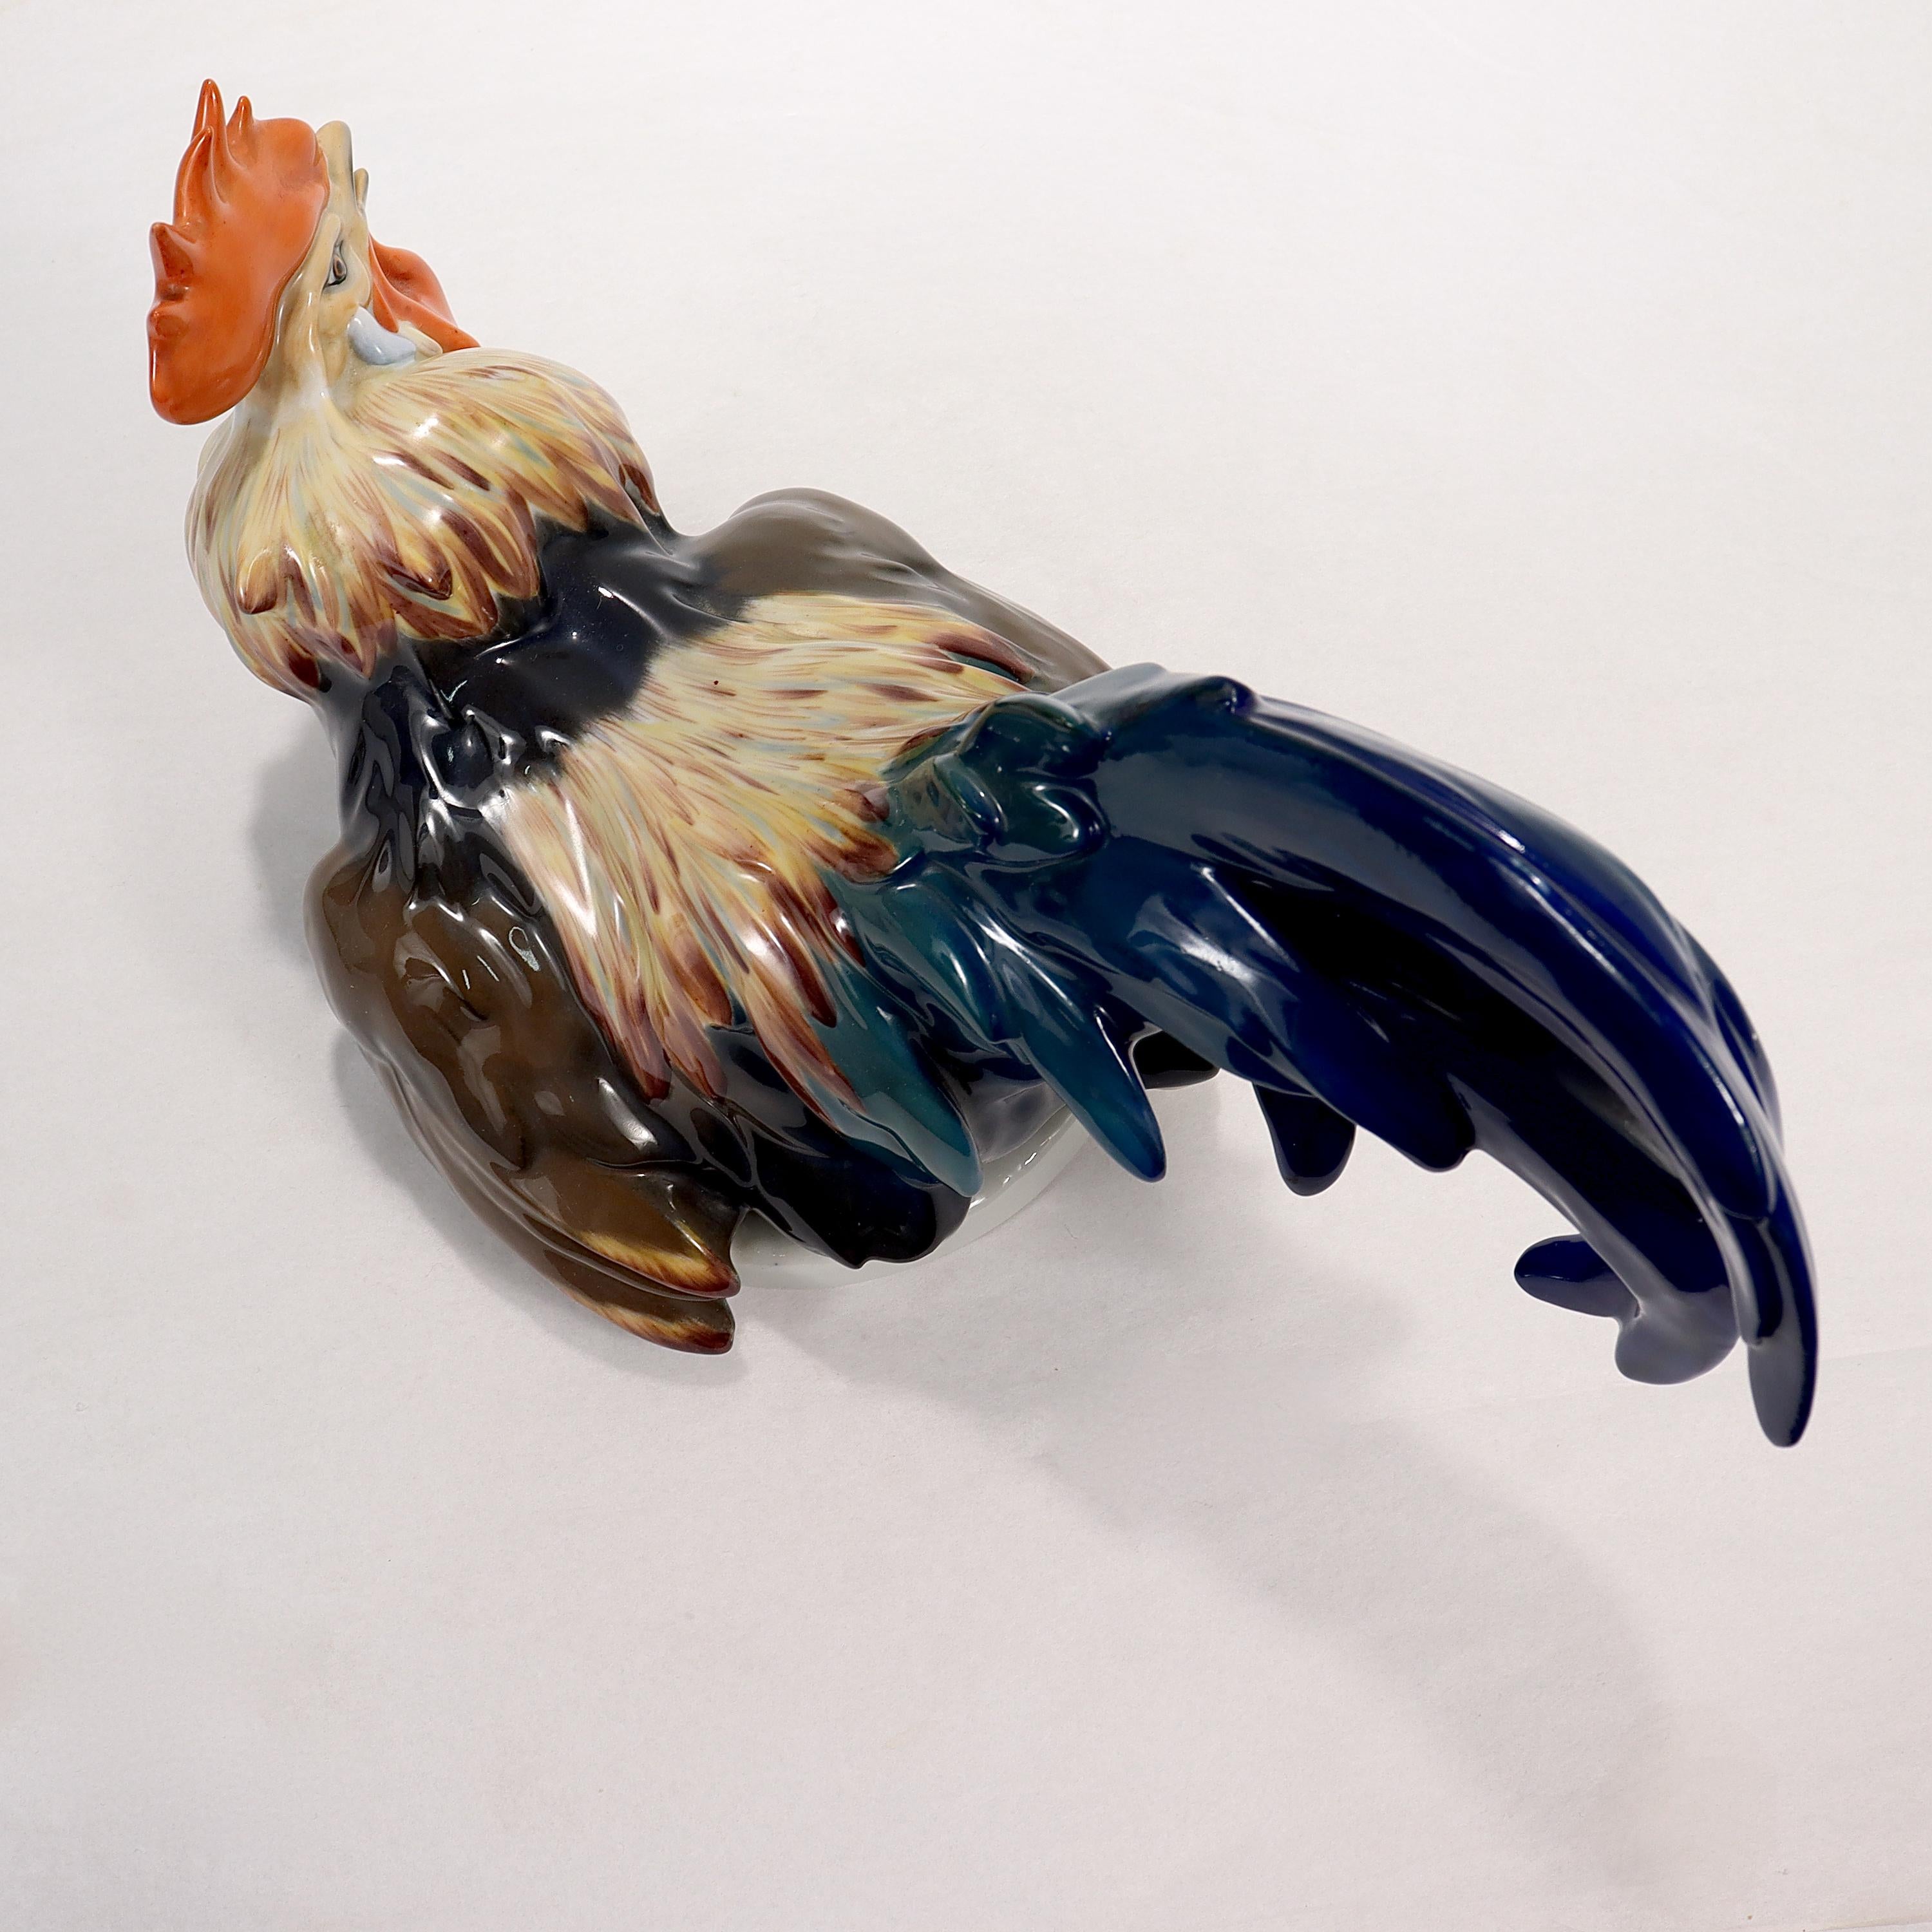 Large Mid-Century Rosenthal Porcelain Figurine of a Rooster by J. Feldtmann For Sale 2